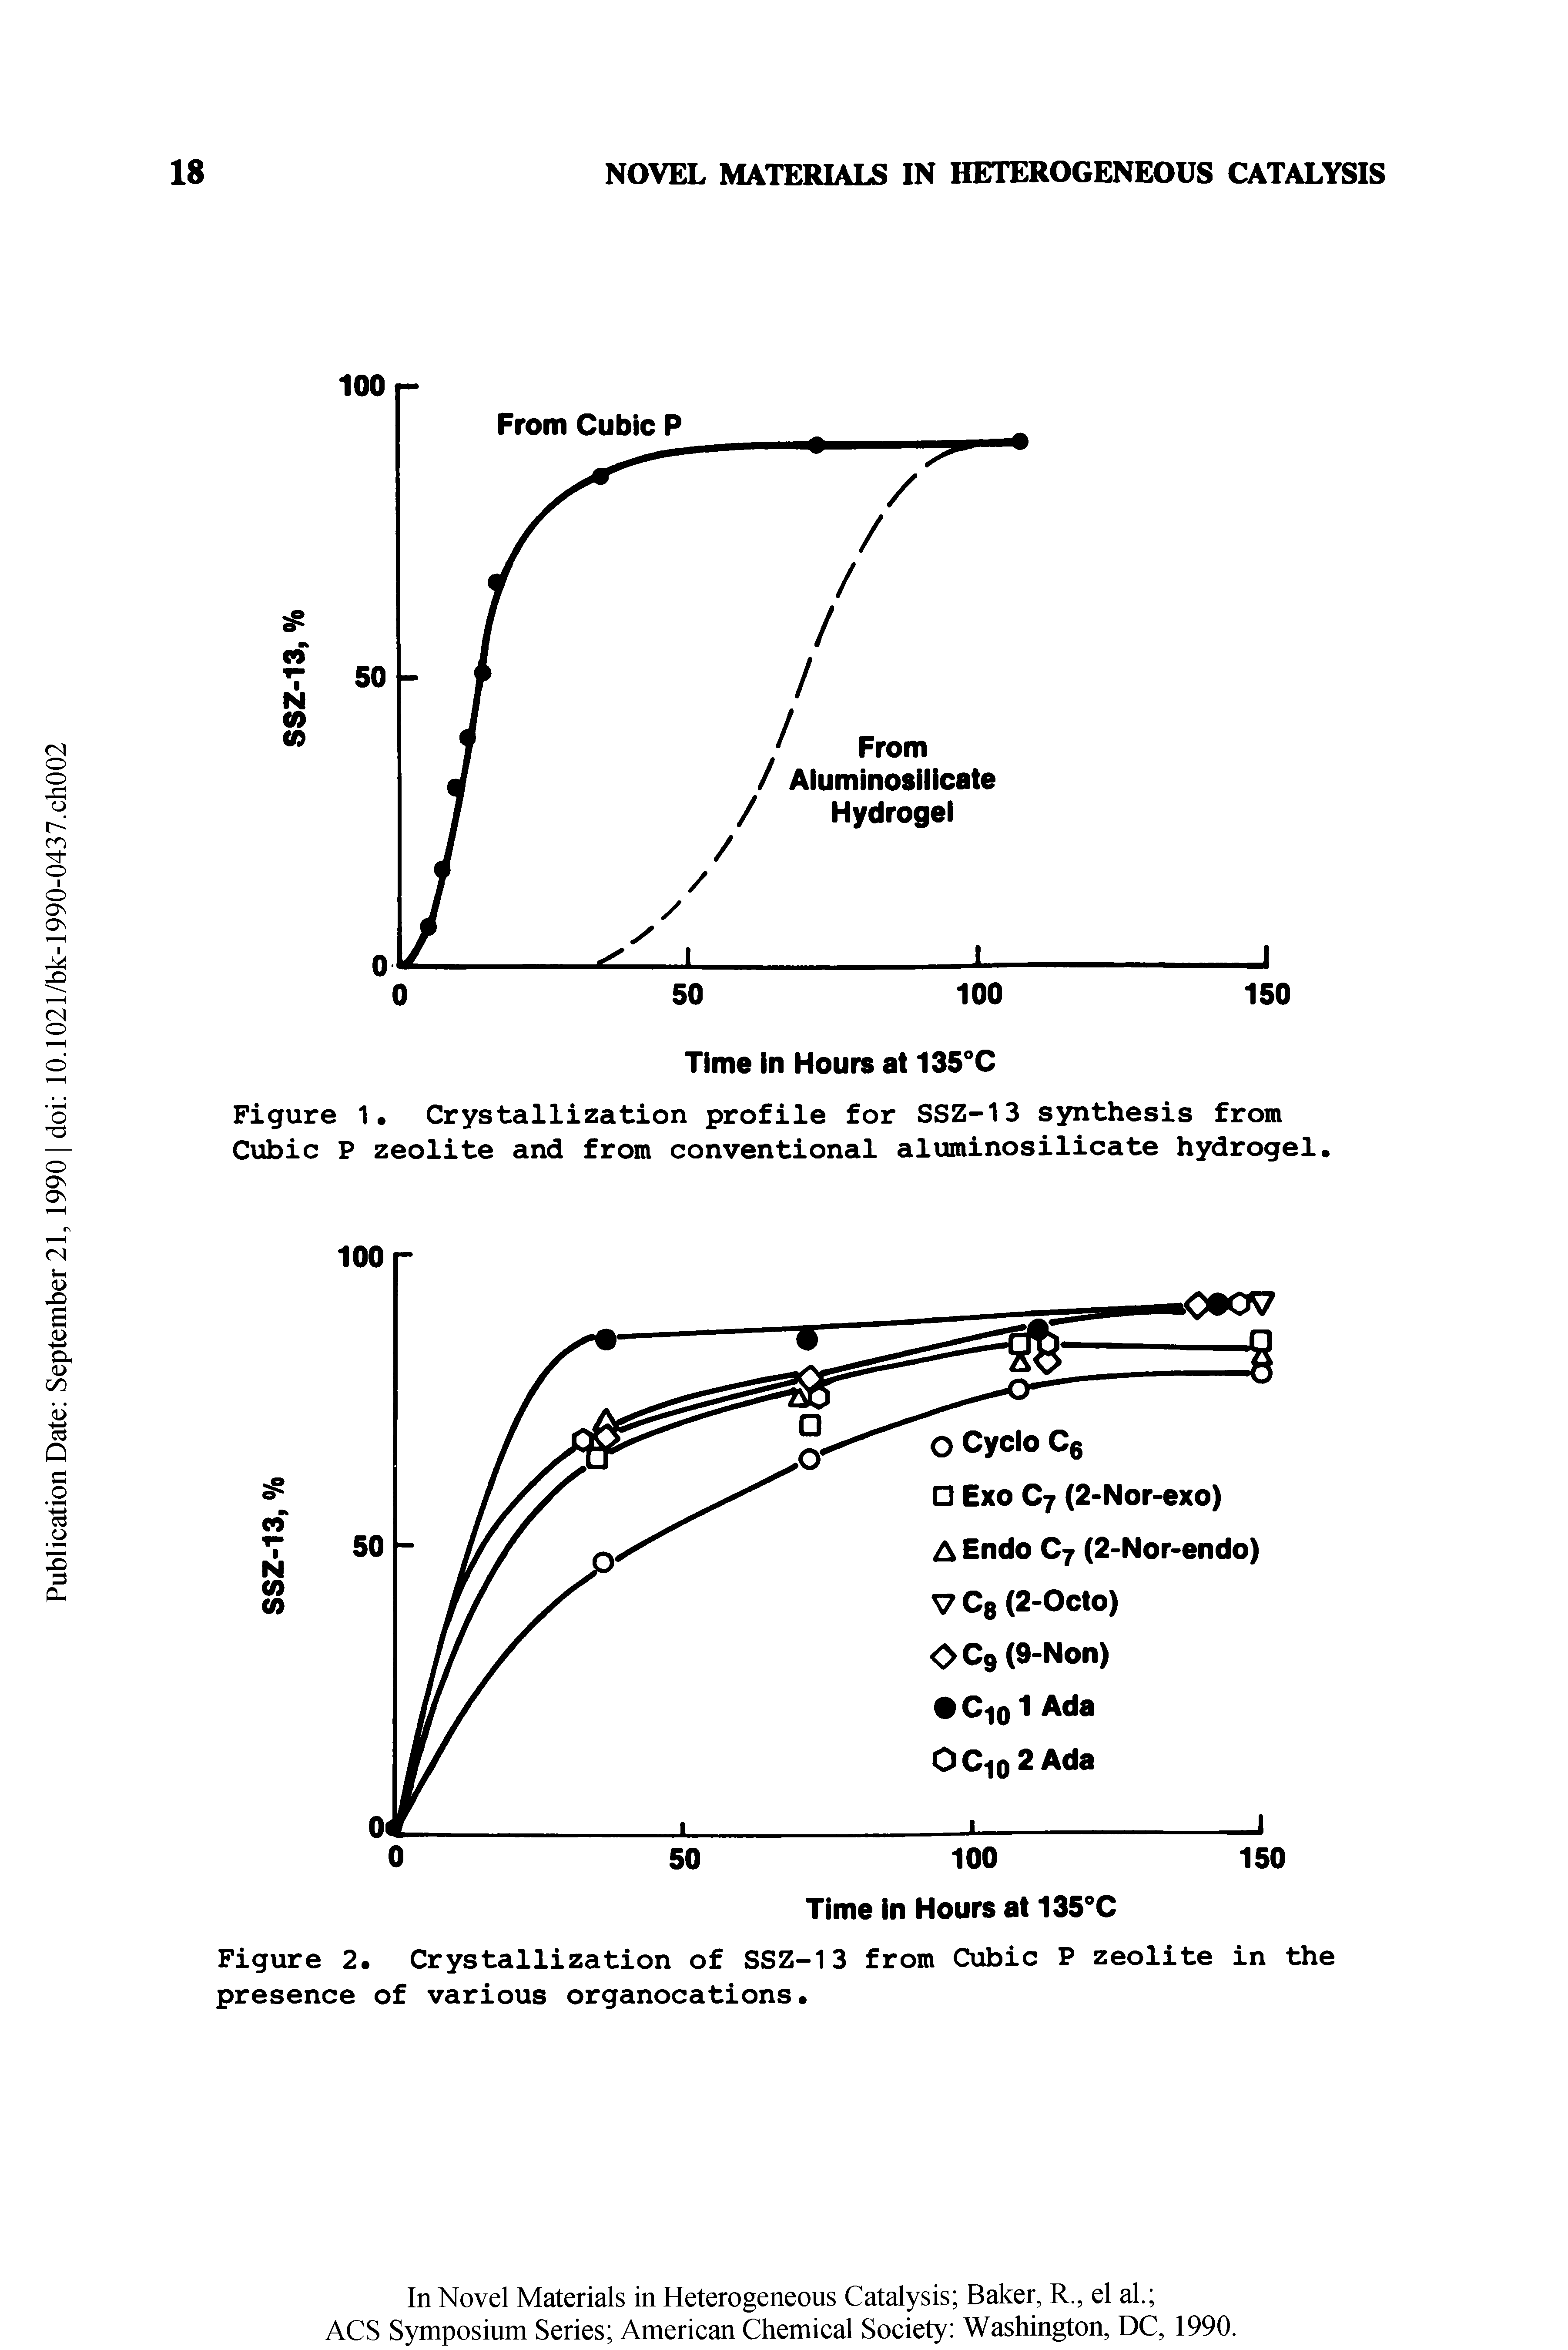 Figure 1. Crystallization profile for SSZ-13 synthesis from Cubic P zeolite and from conventional aluminosilicate hydrogel.